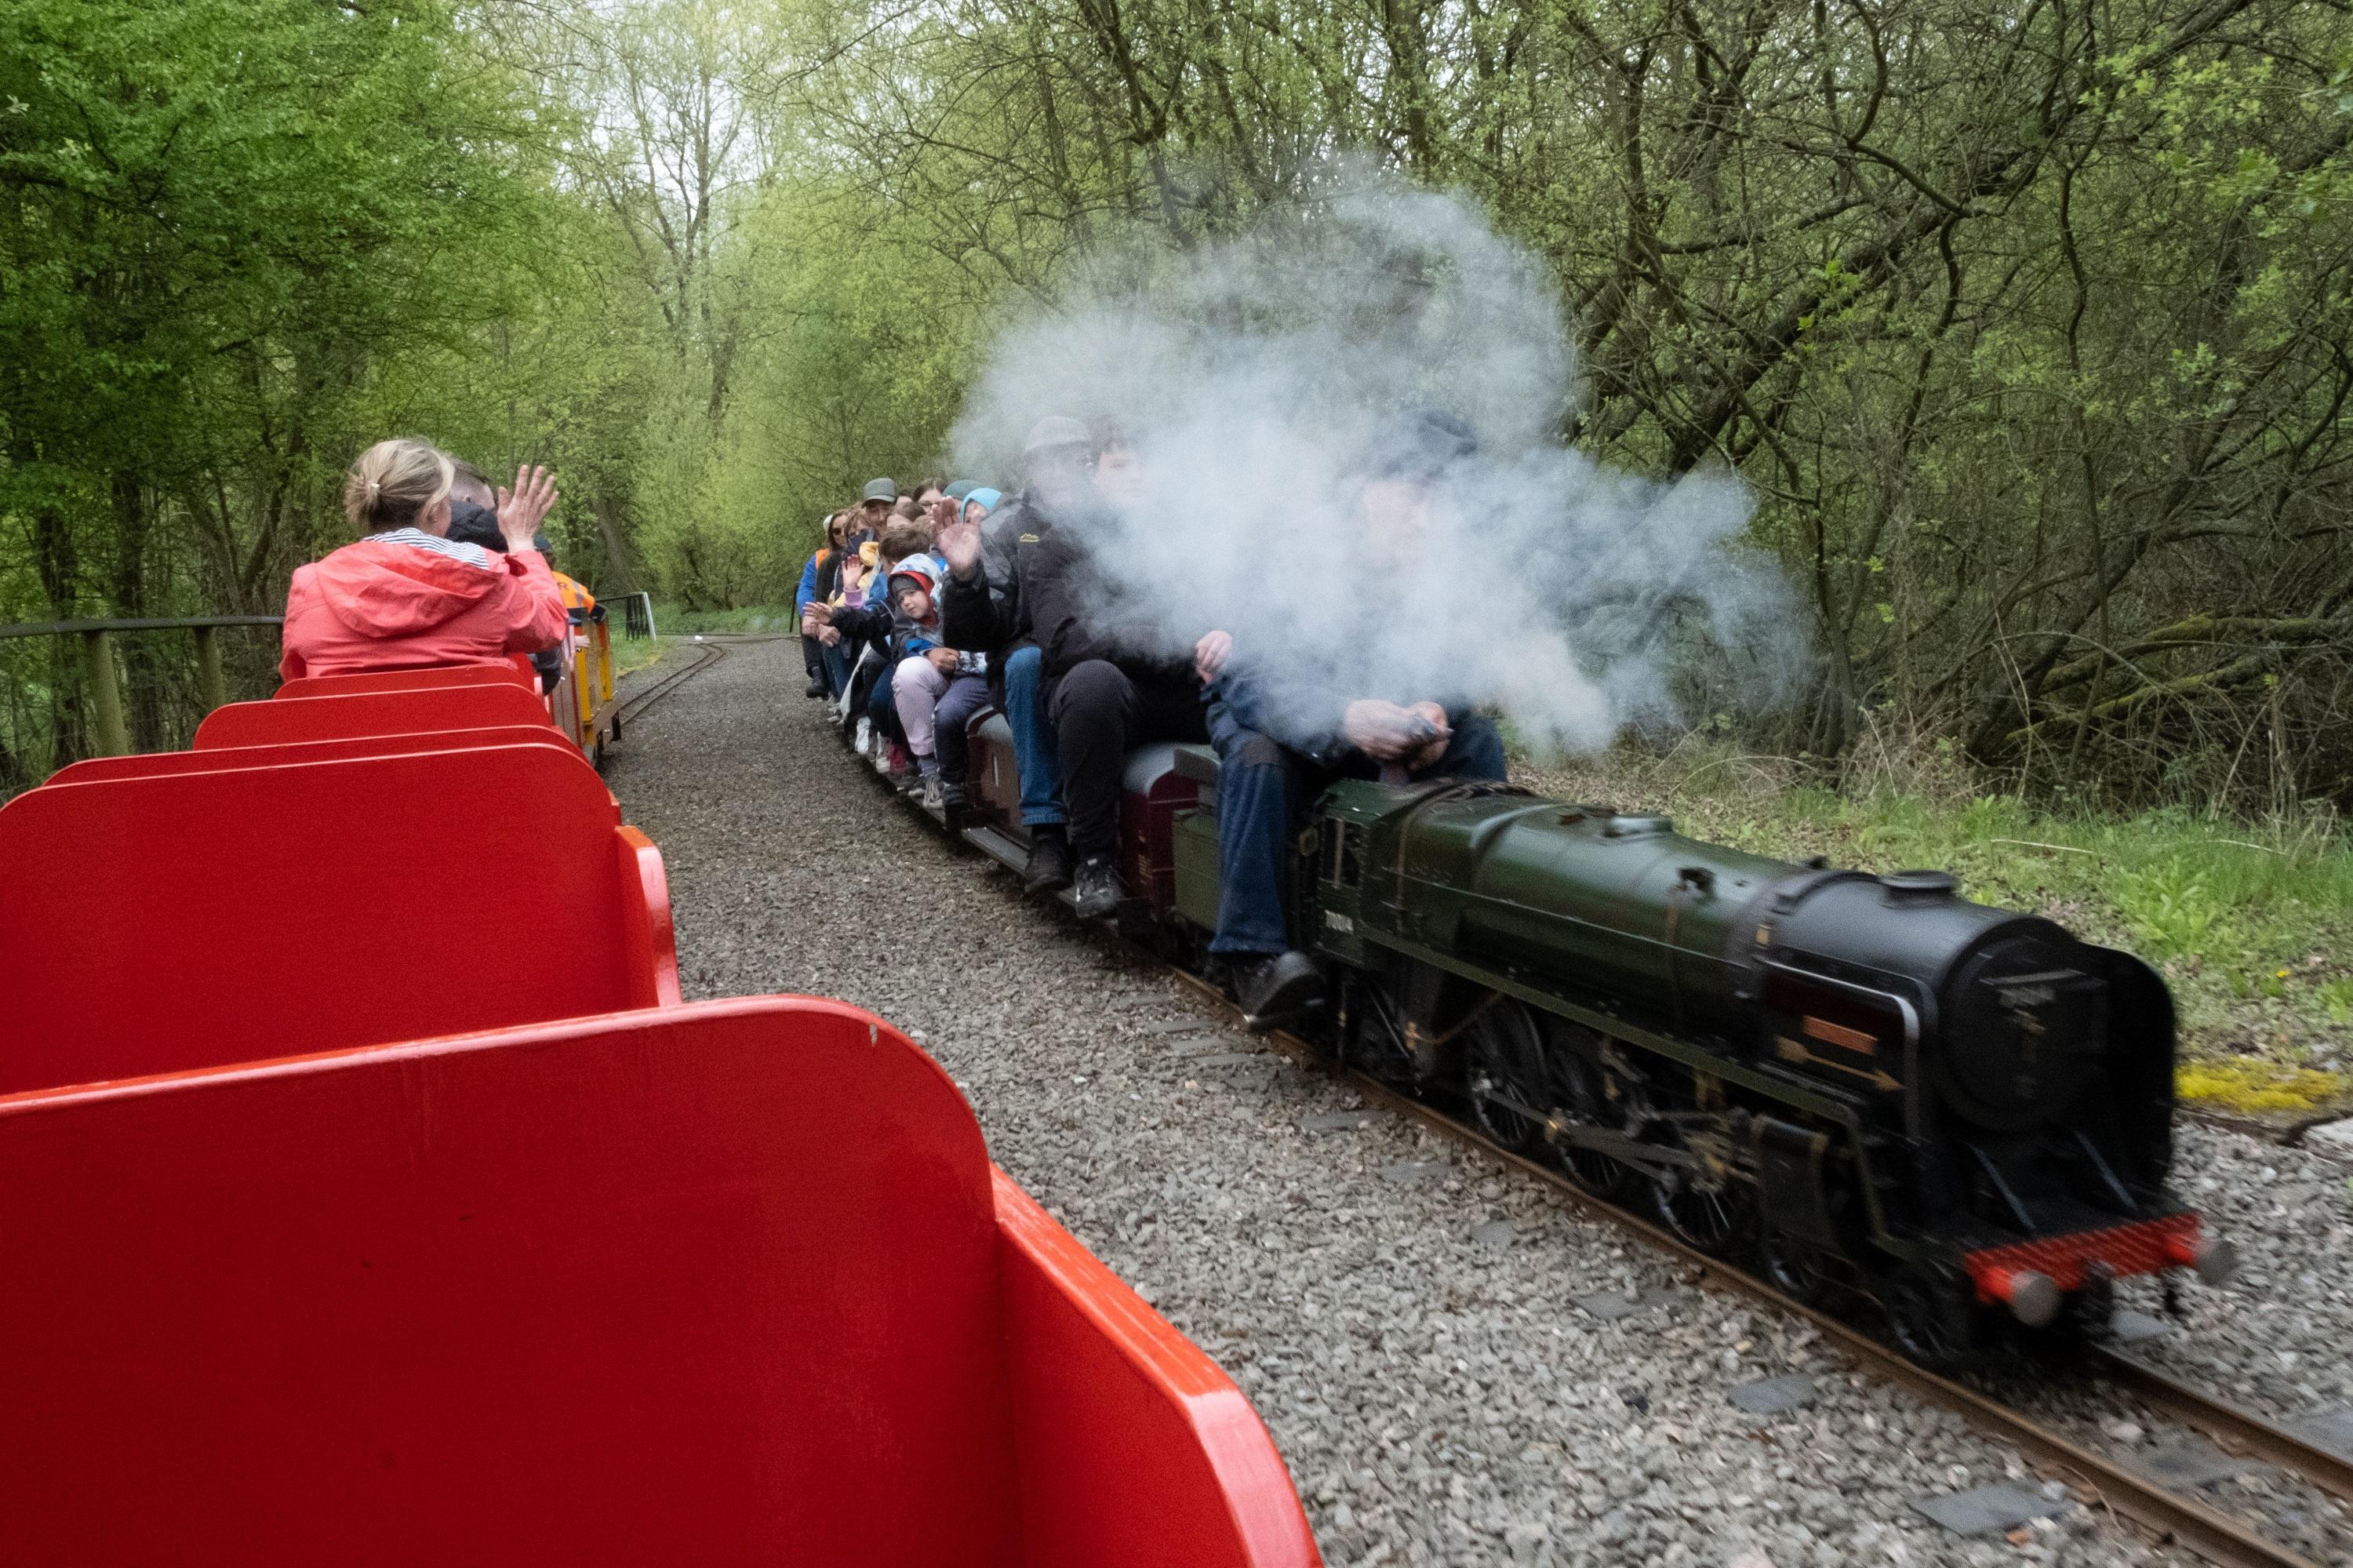 Photograph of a train running at the Echills Wood Railway, with steam rising from the train